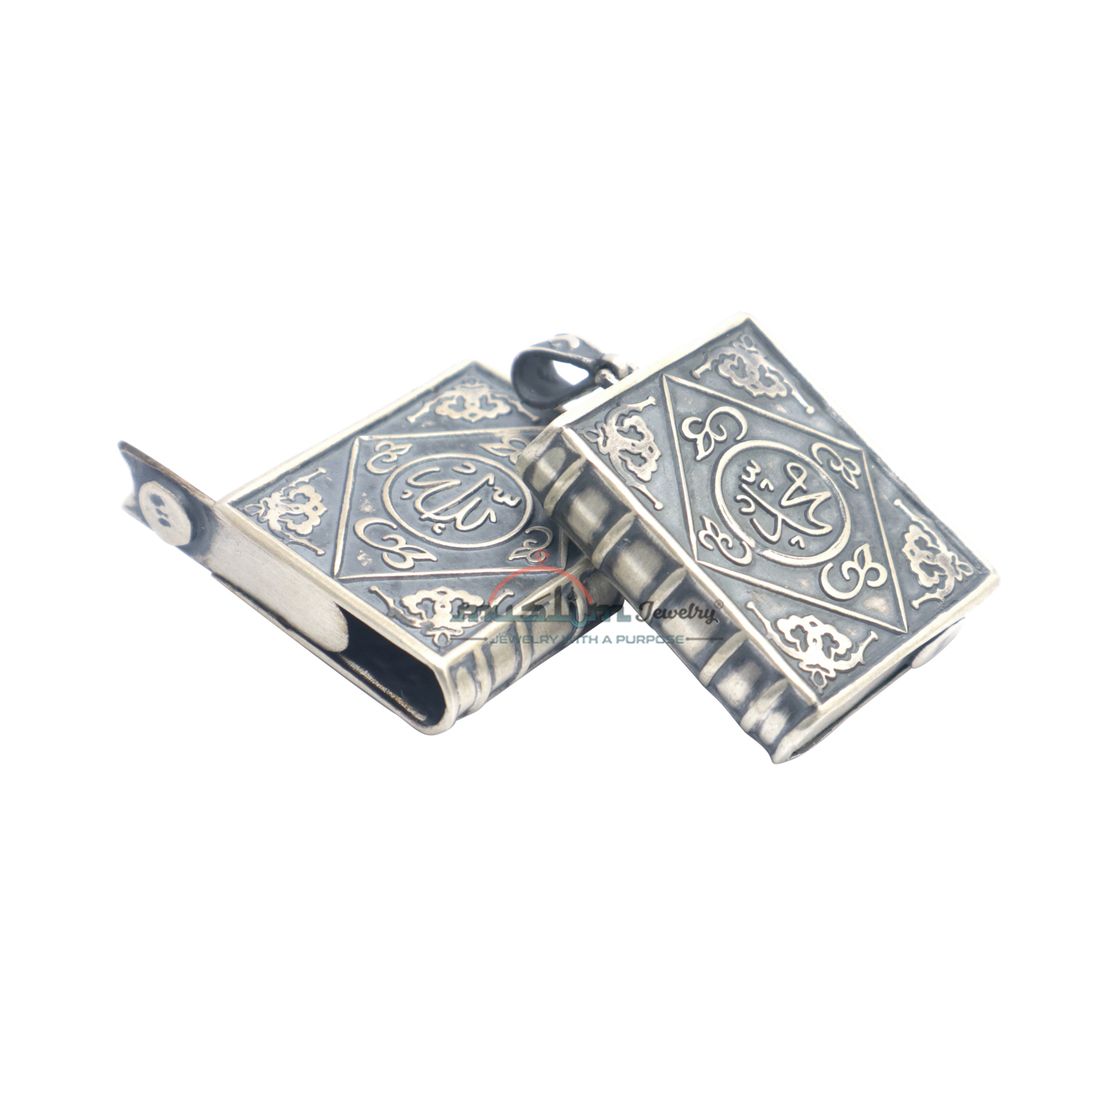 Medium Sterling Silver Open-able Book Talisman Pendant with Allah Muhammad 3.3×2.8cm